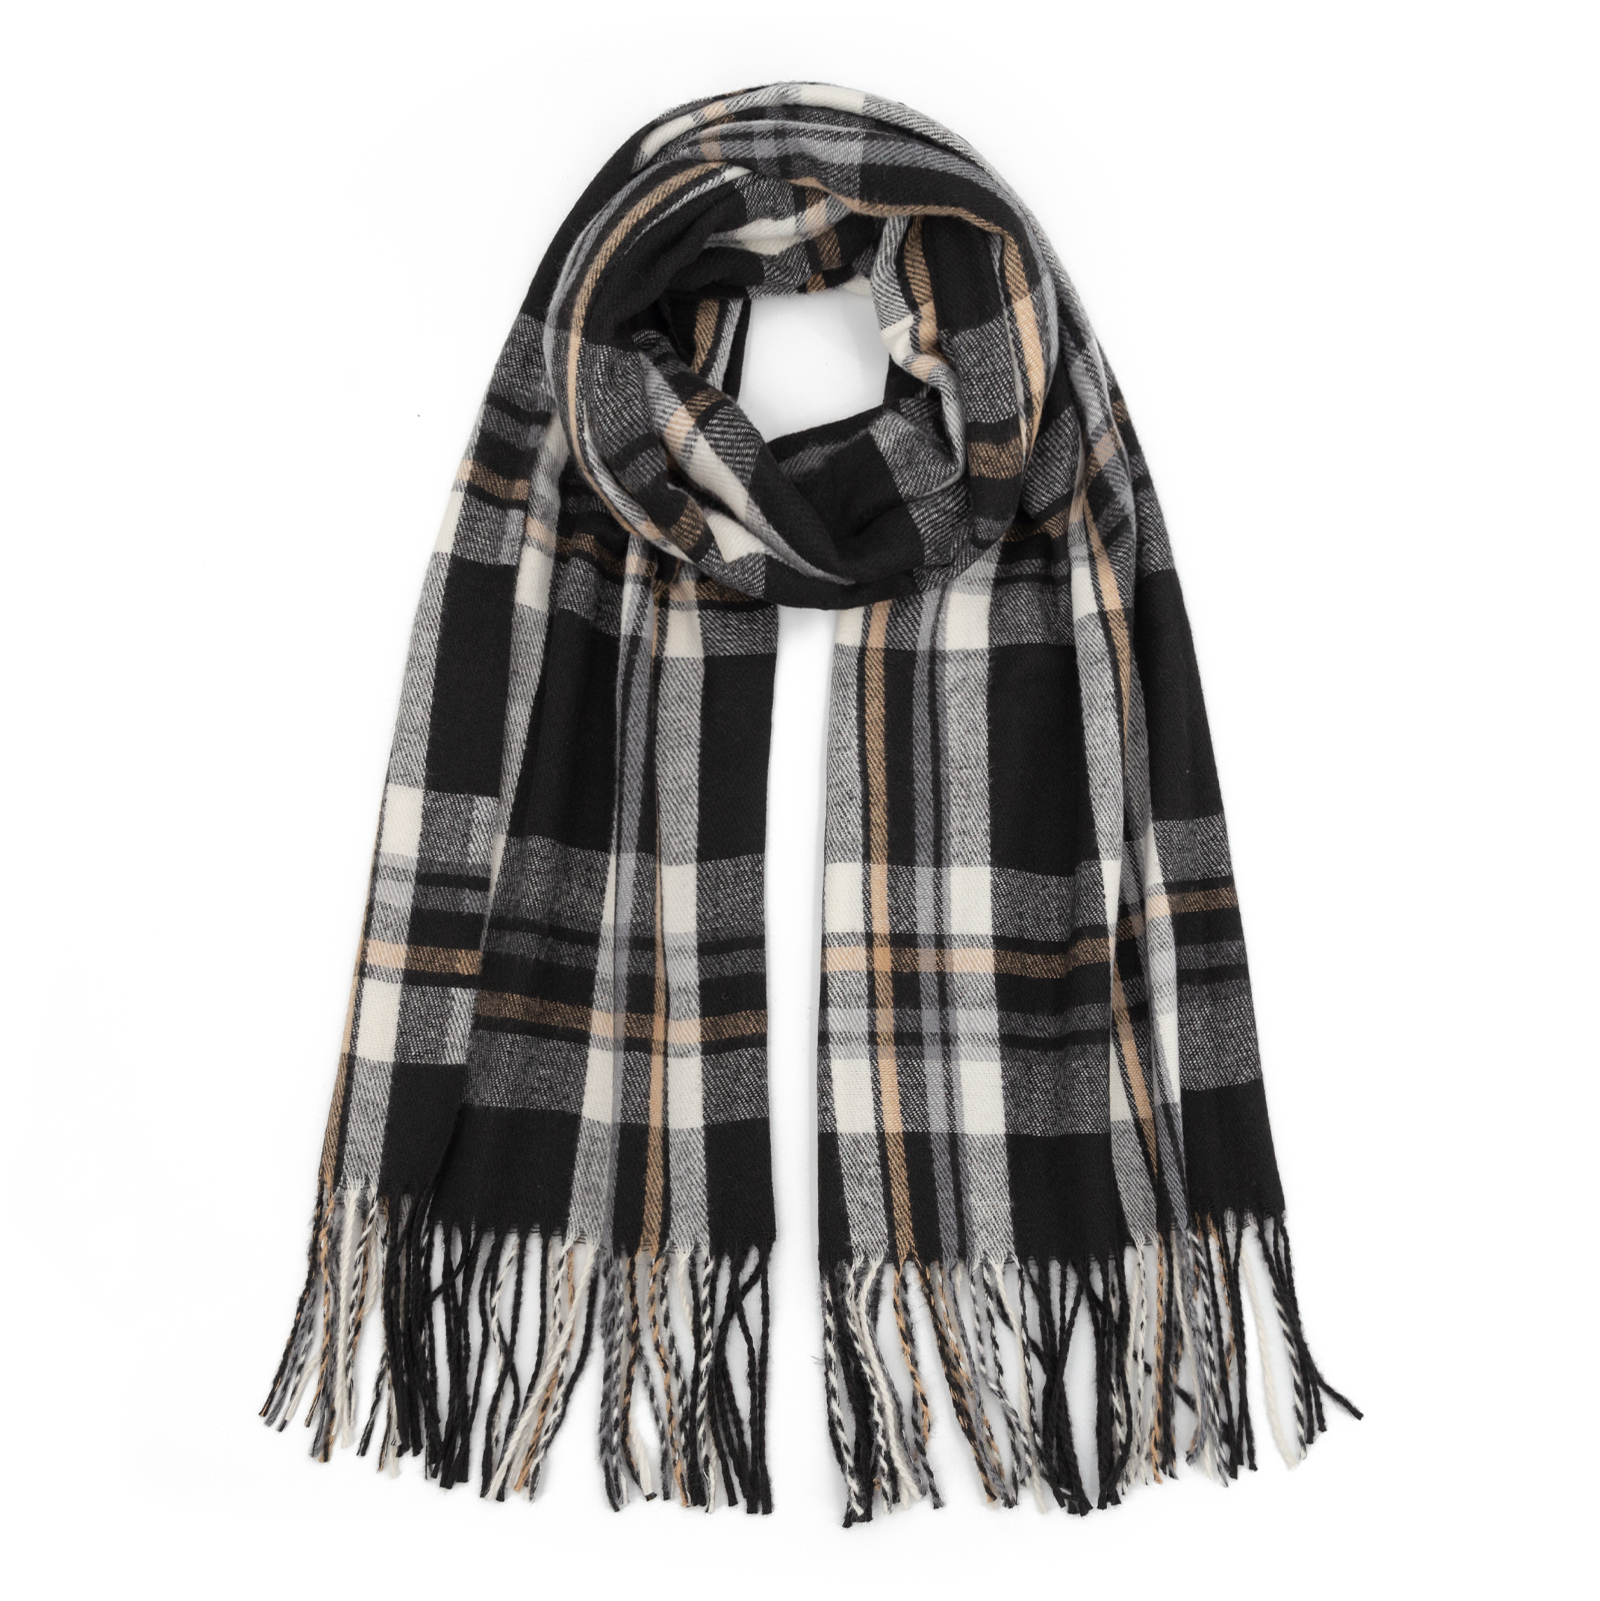 China OEM Factory Wholesale Winter Soft Warm Unisex Plaid Long Scarf with Tassels